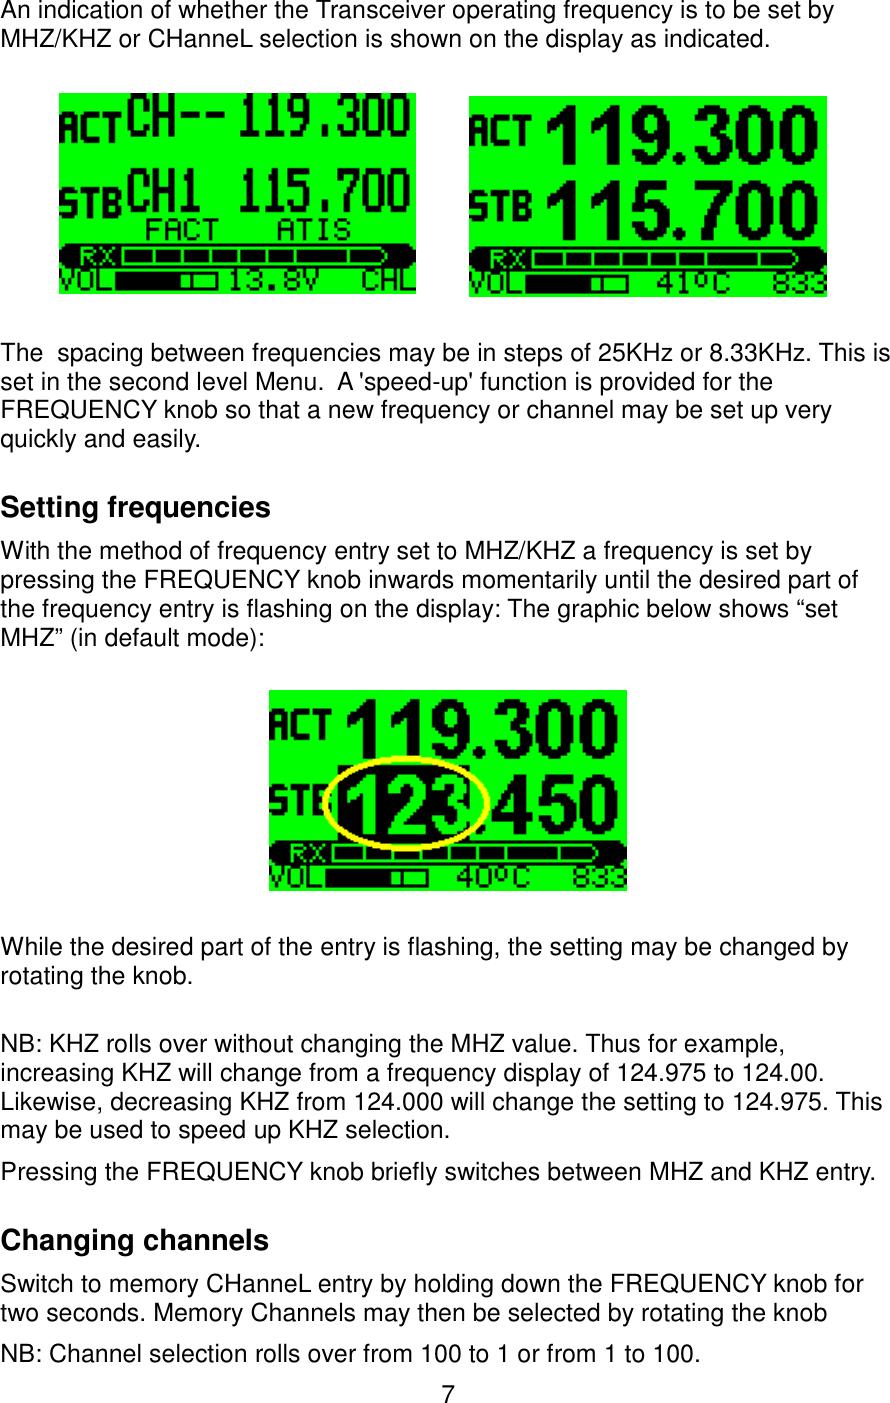 An indication of whether the Transceiver operating frequency is to be set by MHZ/KHZ or CHanneL selection is shown on the display as indicated. The  spacing between frequencies may be in steps of 25KHz or 8.33KHz. This is set in the second level Menu.  A &apos;speed-up&apos; function is provided for the FREQUENCY knob so that a new frequency or channel may be set up very quickly and easily.Setting frequenciesWith the method of frequency entry set to MHZ/KHZ a frequency is set by pressing the FREQUENCY knob inwards momentarily until the desired part of the frequency entry is flashing on the display: The graphic below shows “set MHZ” (in default mode):While the desired part of the entry is flashing, the setting may be changed by rotating the knob.NB: KHZ rolls over without changing the MHZ value. Thus for example, increasing KHZ will change from a frequency display of 124.975 to 124.00. Likewise, decreasing KHZ from 124.000 will change the setting to 124.975. This may be used to speed up KHZ selection.Pressing the FREQUENCY knob briefly switches between MHZ and KHZ entry. Changing channelsSwitch to memory CHanneL entry by holding down the FREQUENCY knob for two seconds. Memory Channels may then be selected by rotating the knobNB: Channel selection rolls over from 100 to 1 or from 1 to 100.7